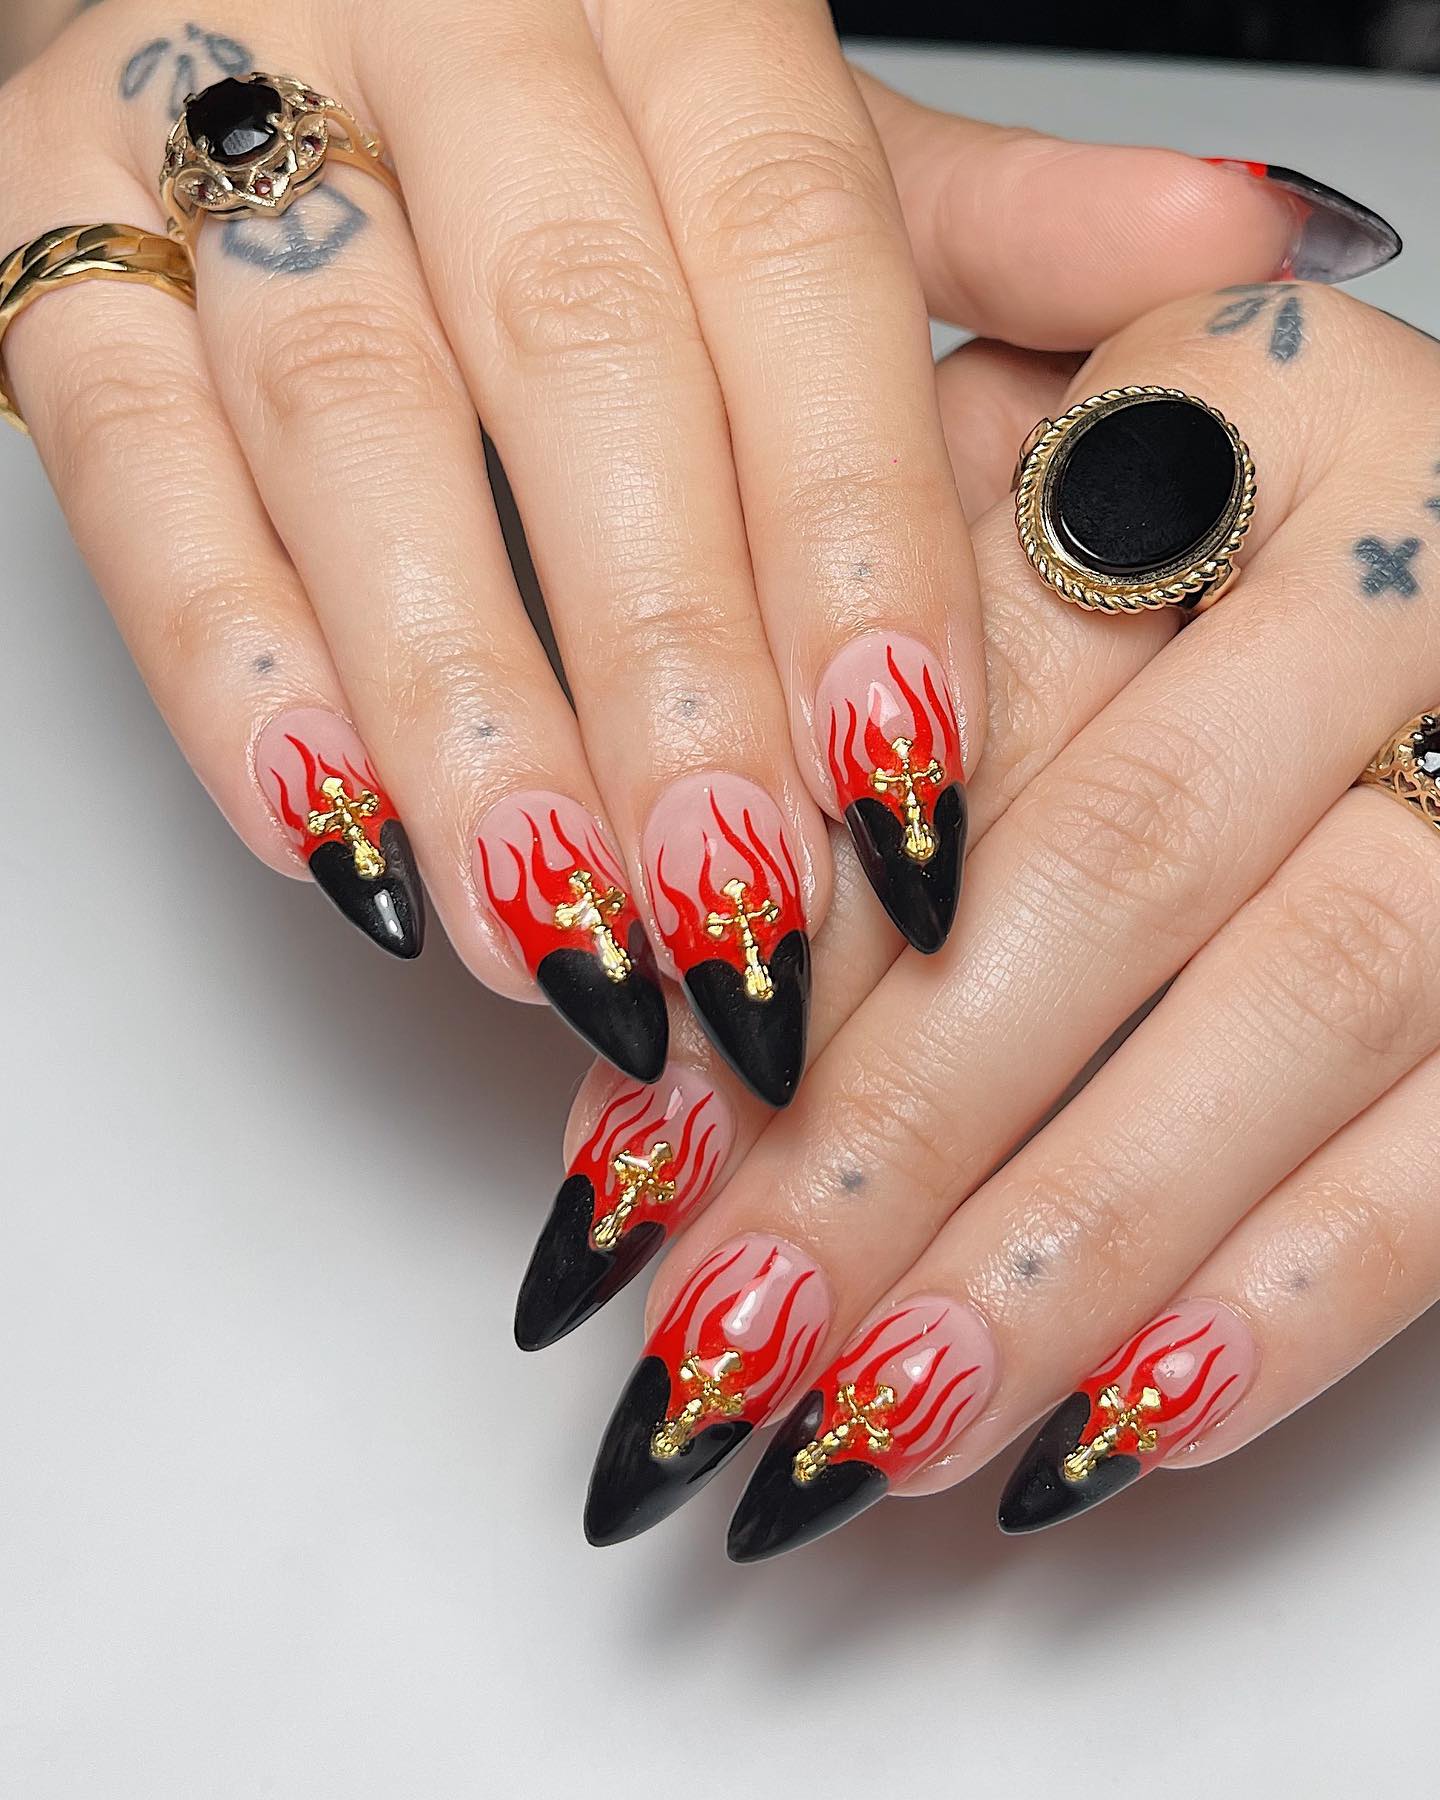 Red and black color combo works so well on nails like the one above. Black French tips and red flames can make you stand out from the crowd. Plus, if you are a religious person, adding a silver cross is a nice way to show your love to your religion.